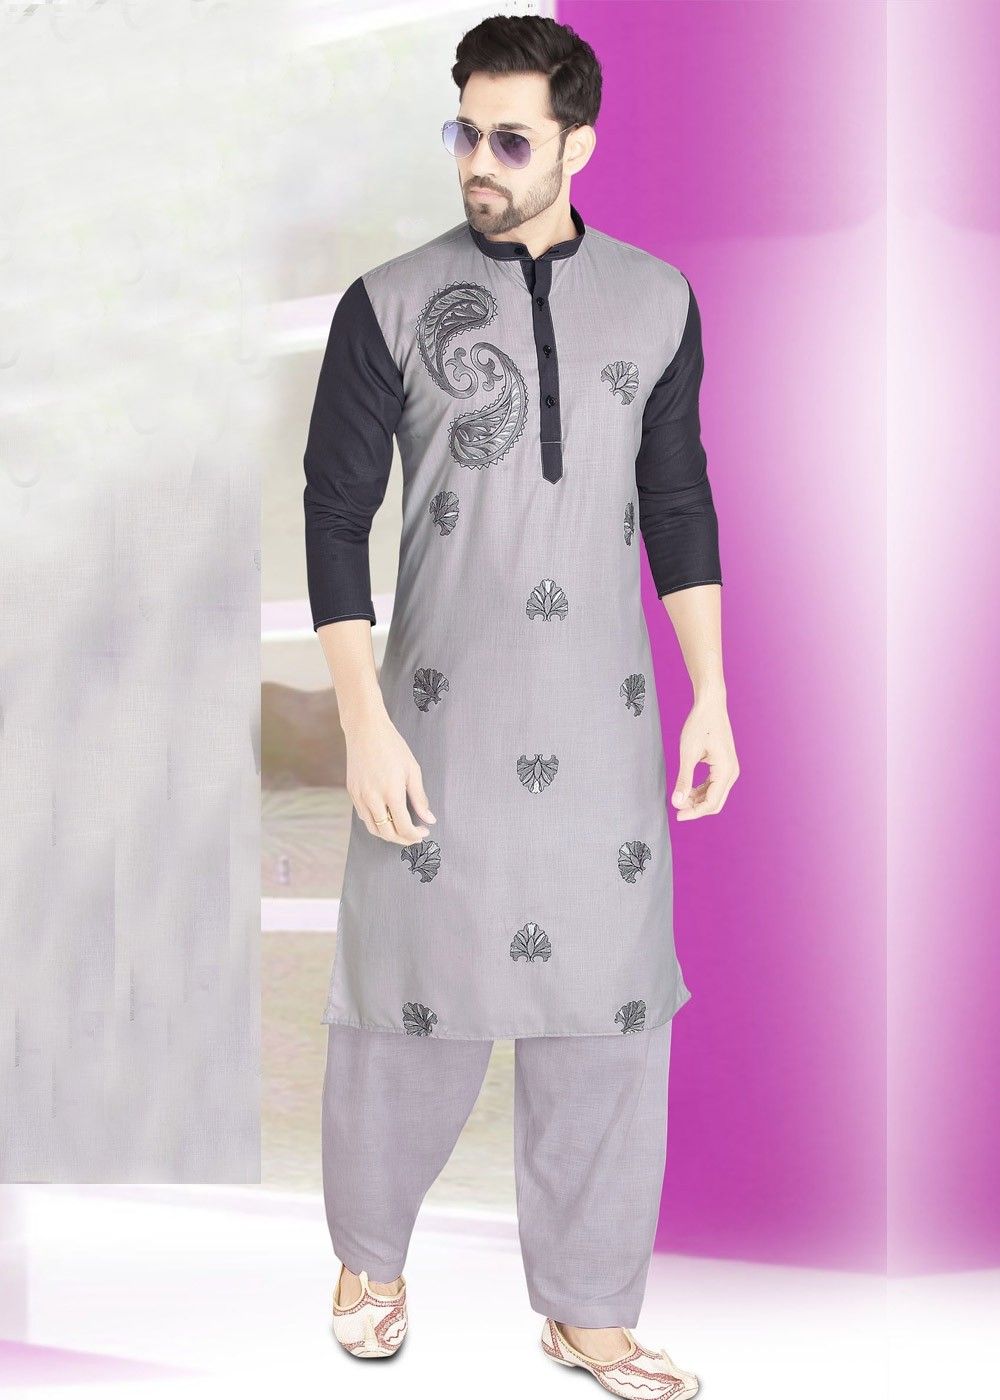 Top 15 Latest Pathani Suit Designs for Men - Blog